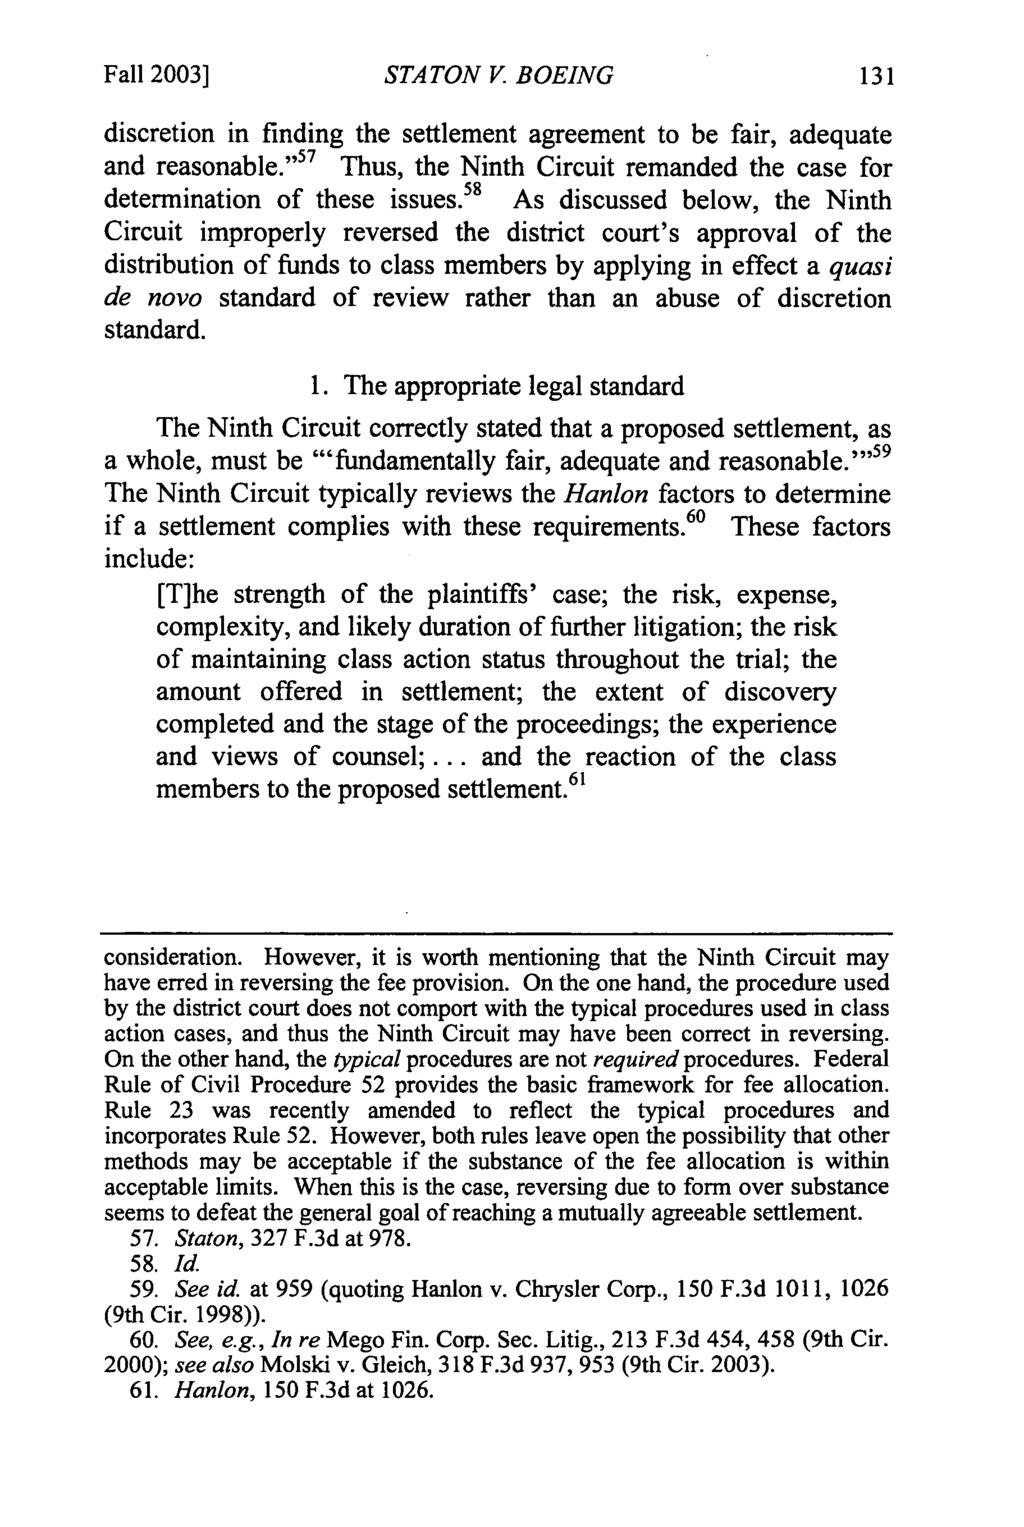 Fall 2003] STA TON V BOEING discretion in finding the settlement agreement to be fair, adequate and reasonable." 57 Thus, the Ninth Circuit remanded the case for determination of these issues.